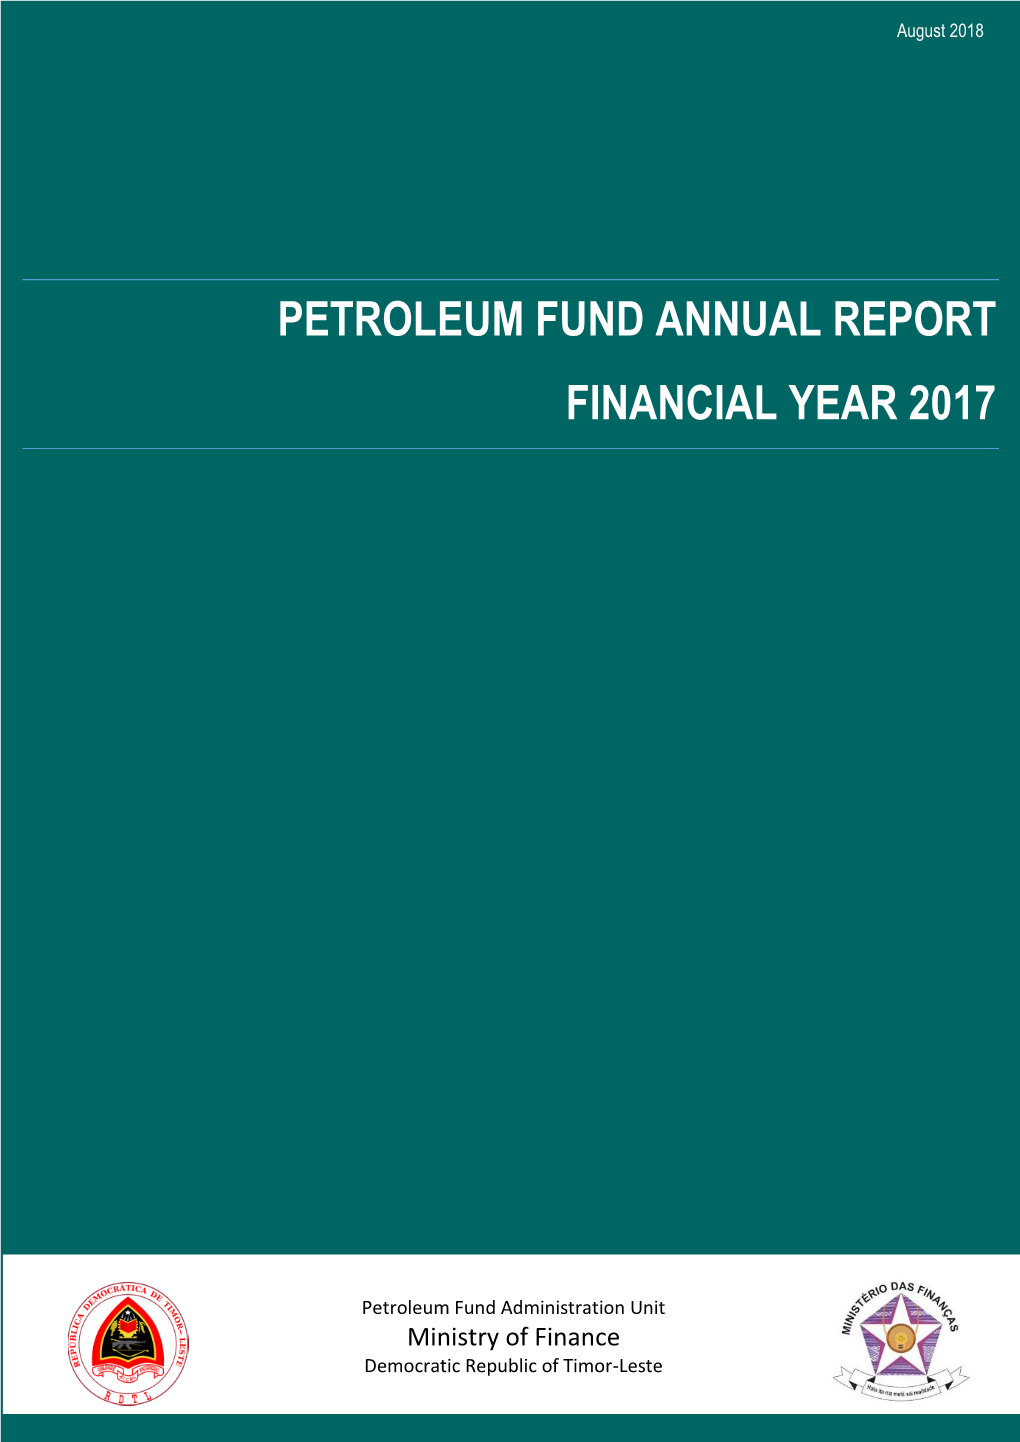 Petroleum Fund Annual Report Financial Year 2017